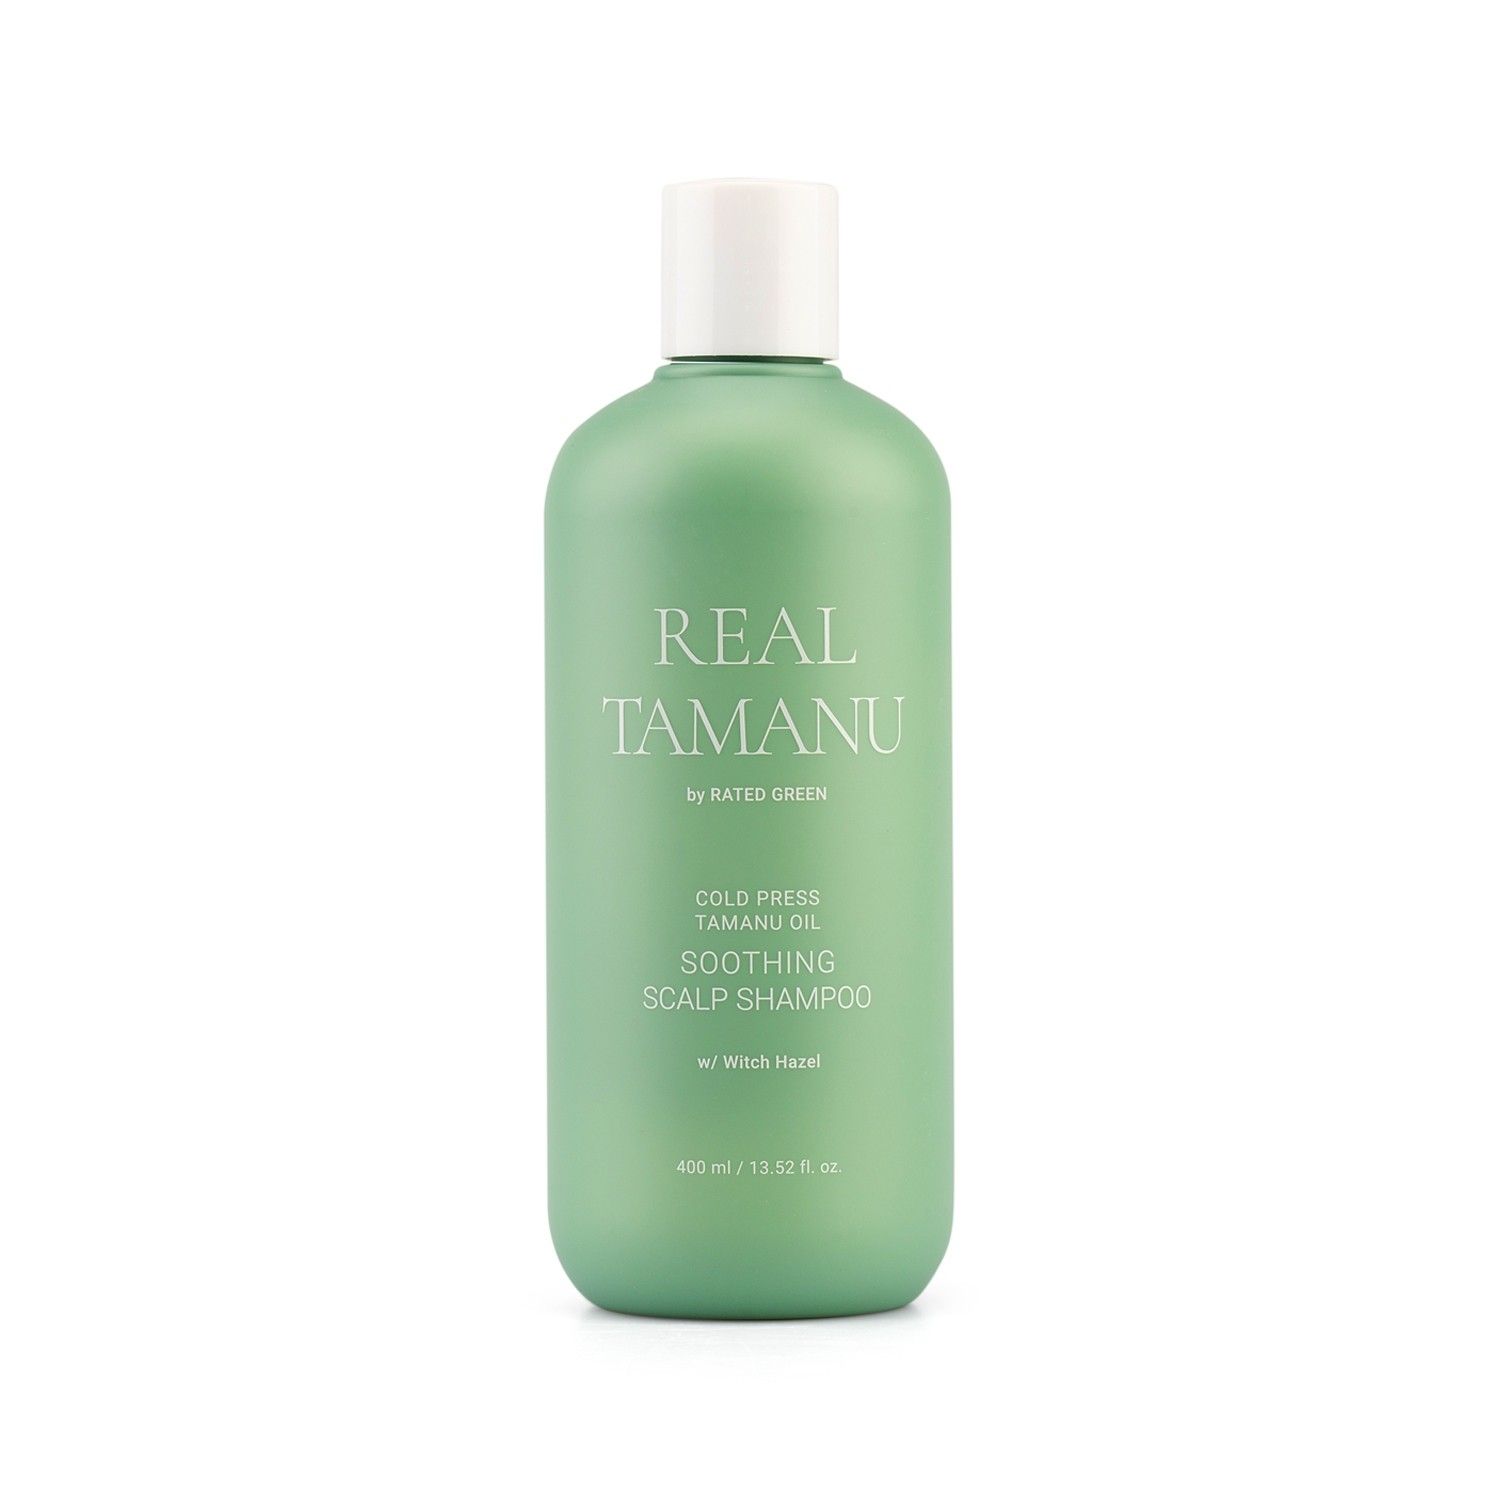 RATED GREEN Cold Pressed Tamanu Oil Soothing Scalp Shampoo